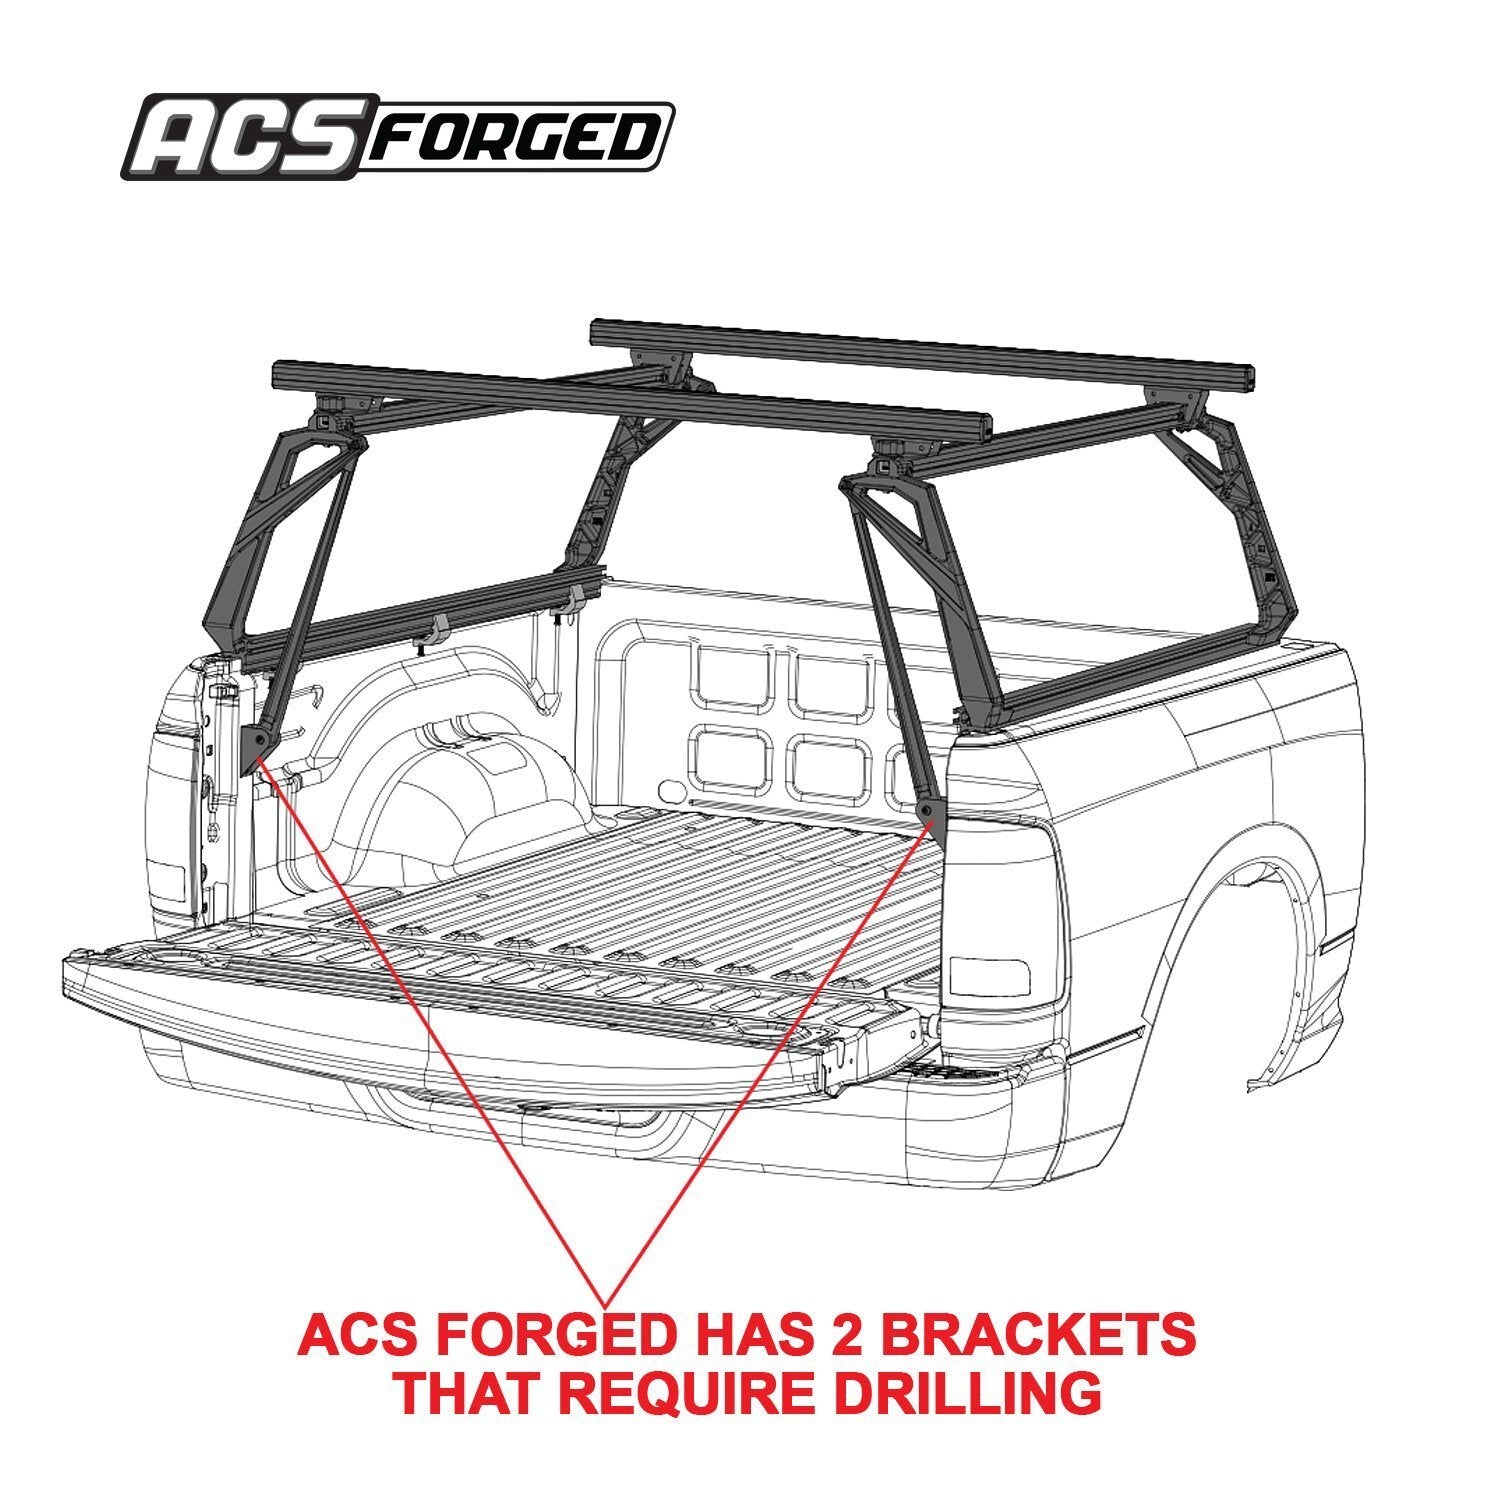 '05-15 Toyota Tacoma-ACS Forged Bed Accessories Leitner Designs design